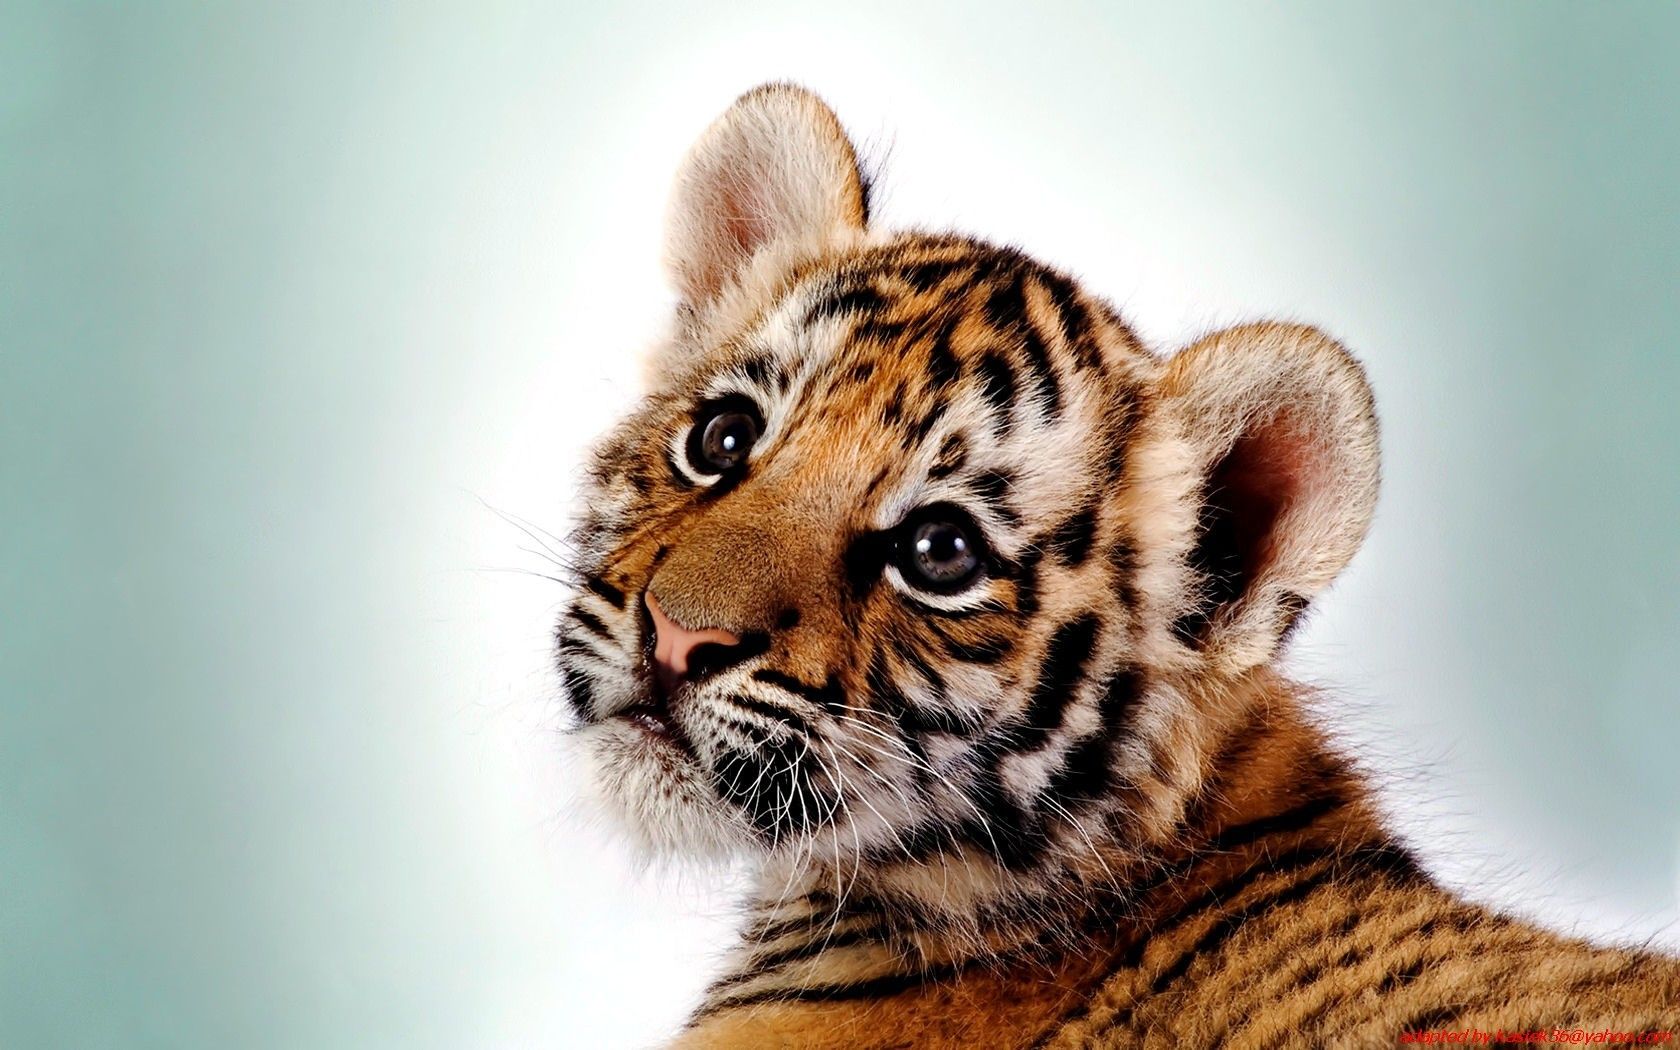 Cute Baby Tiger Wallpaper Images wallpaperwide